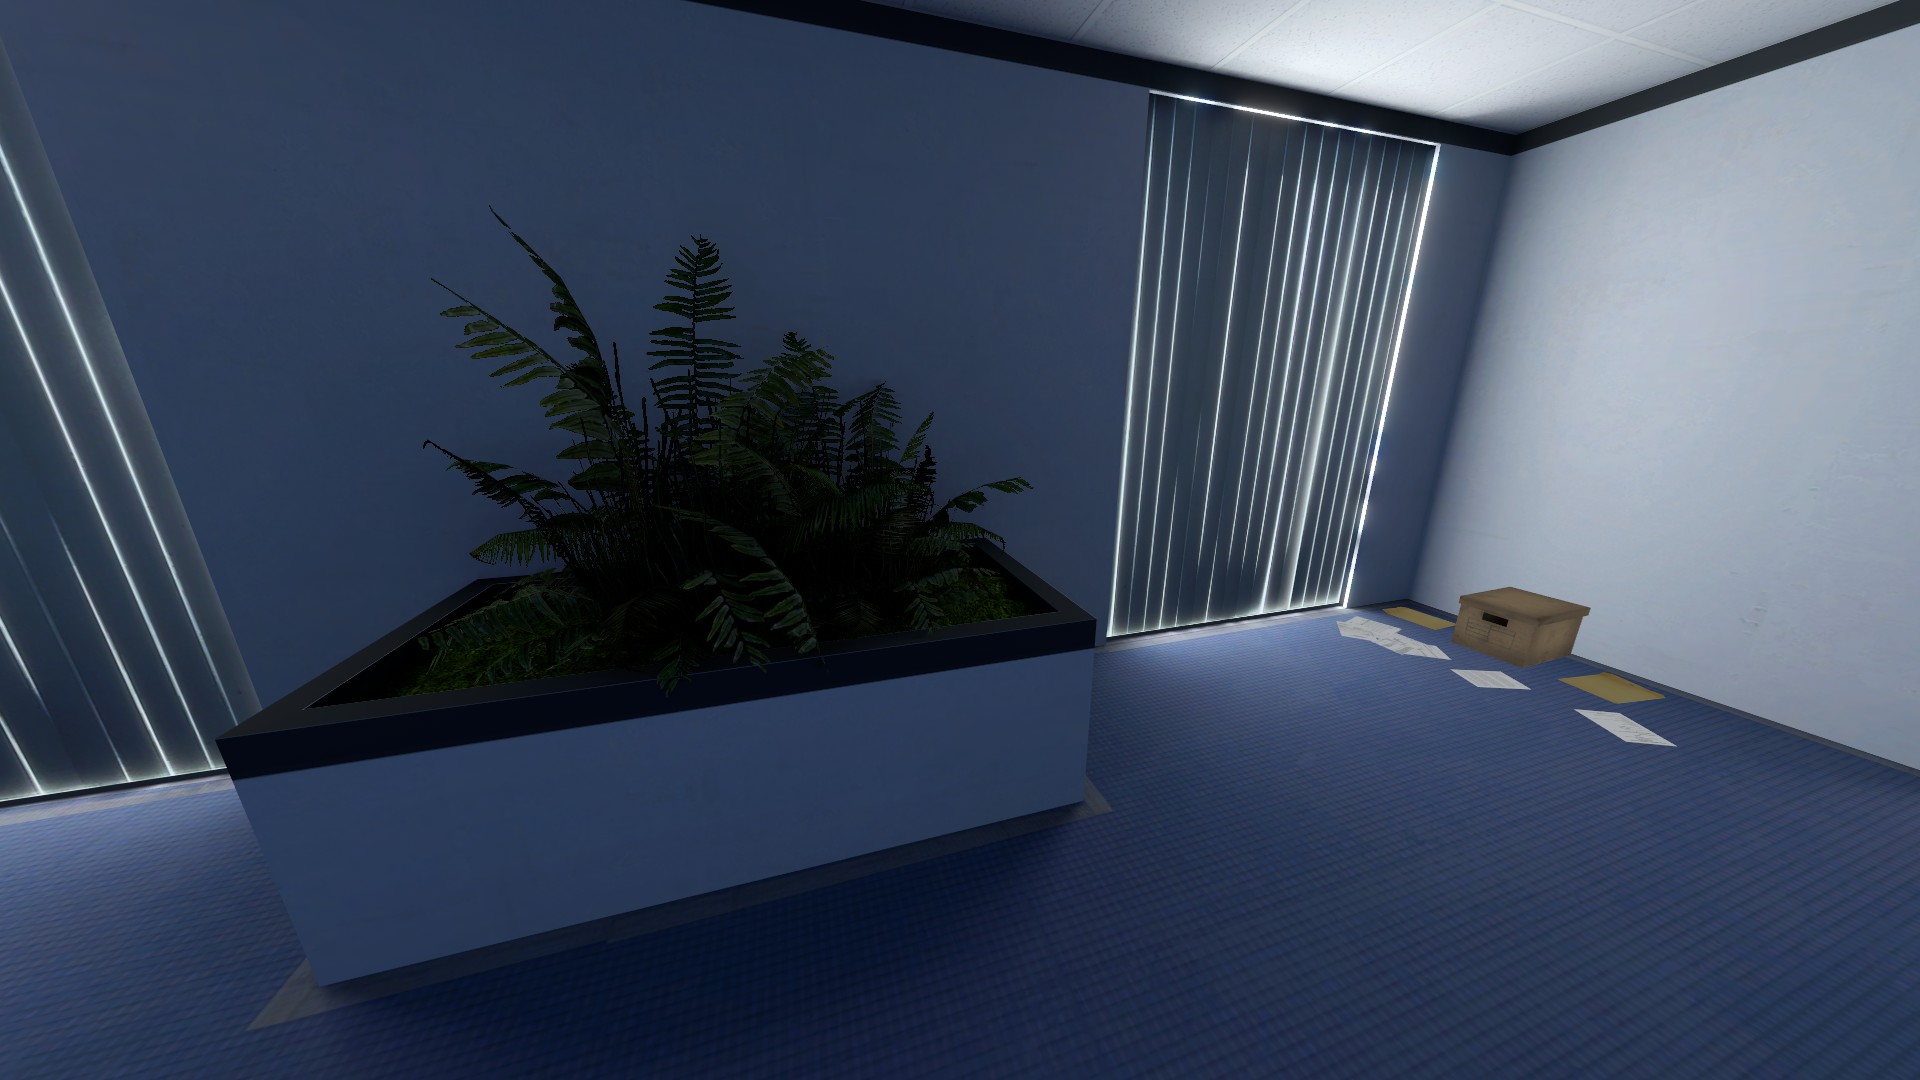 The Stanley Parable: Ultra Deluxe Complete Fern Pictures - Fern Pictures - 4B2D422